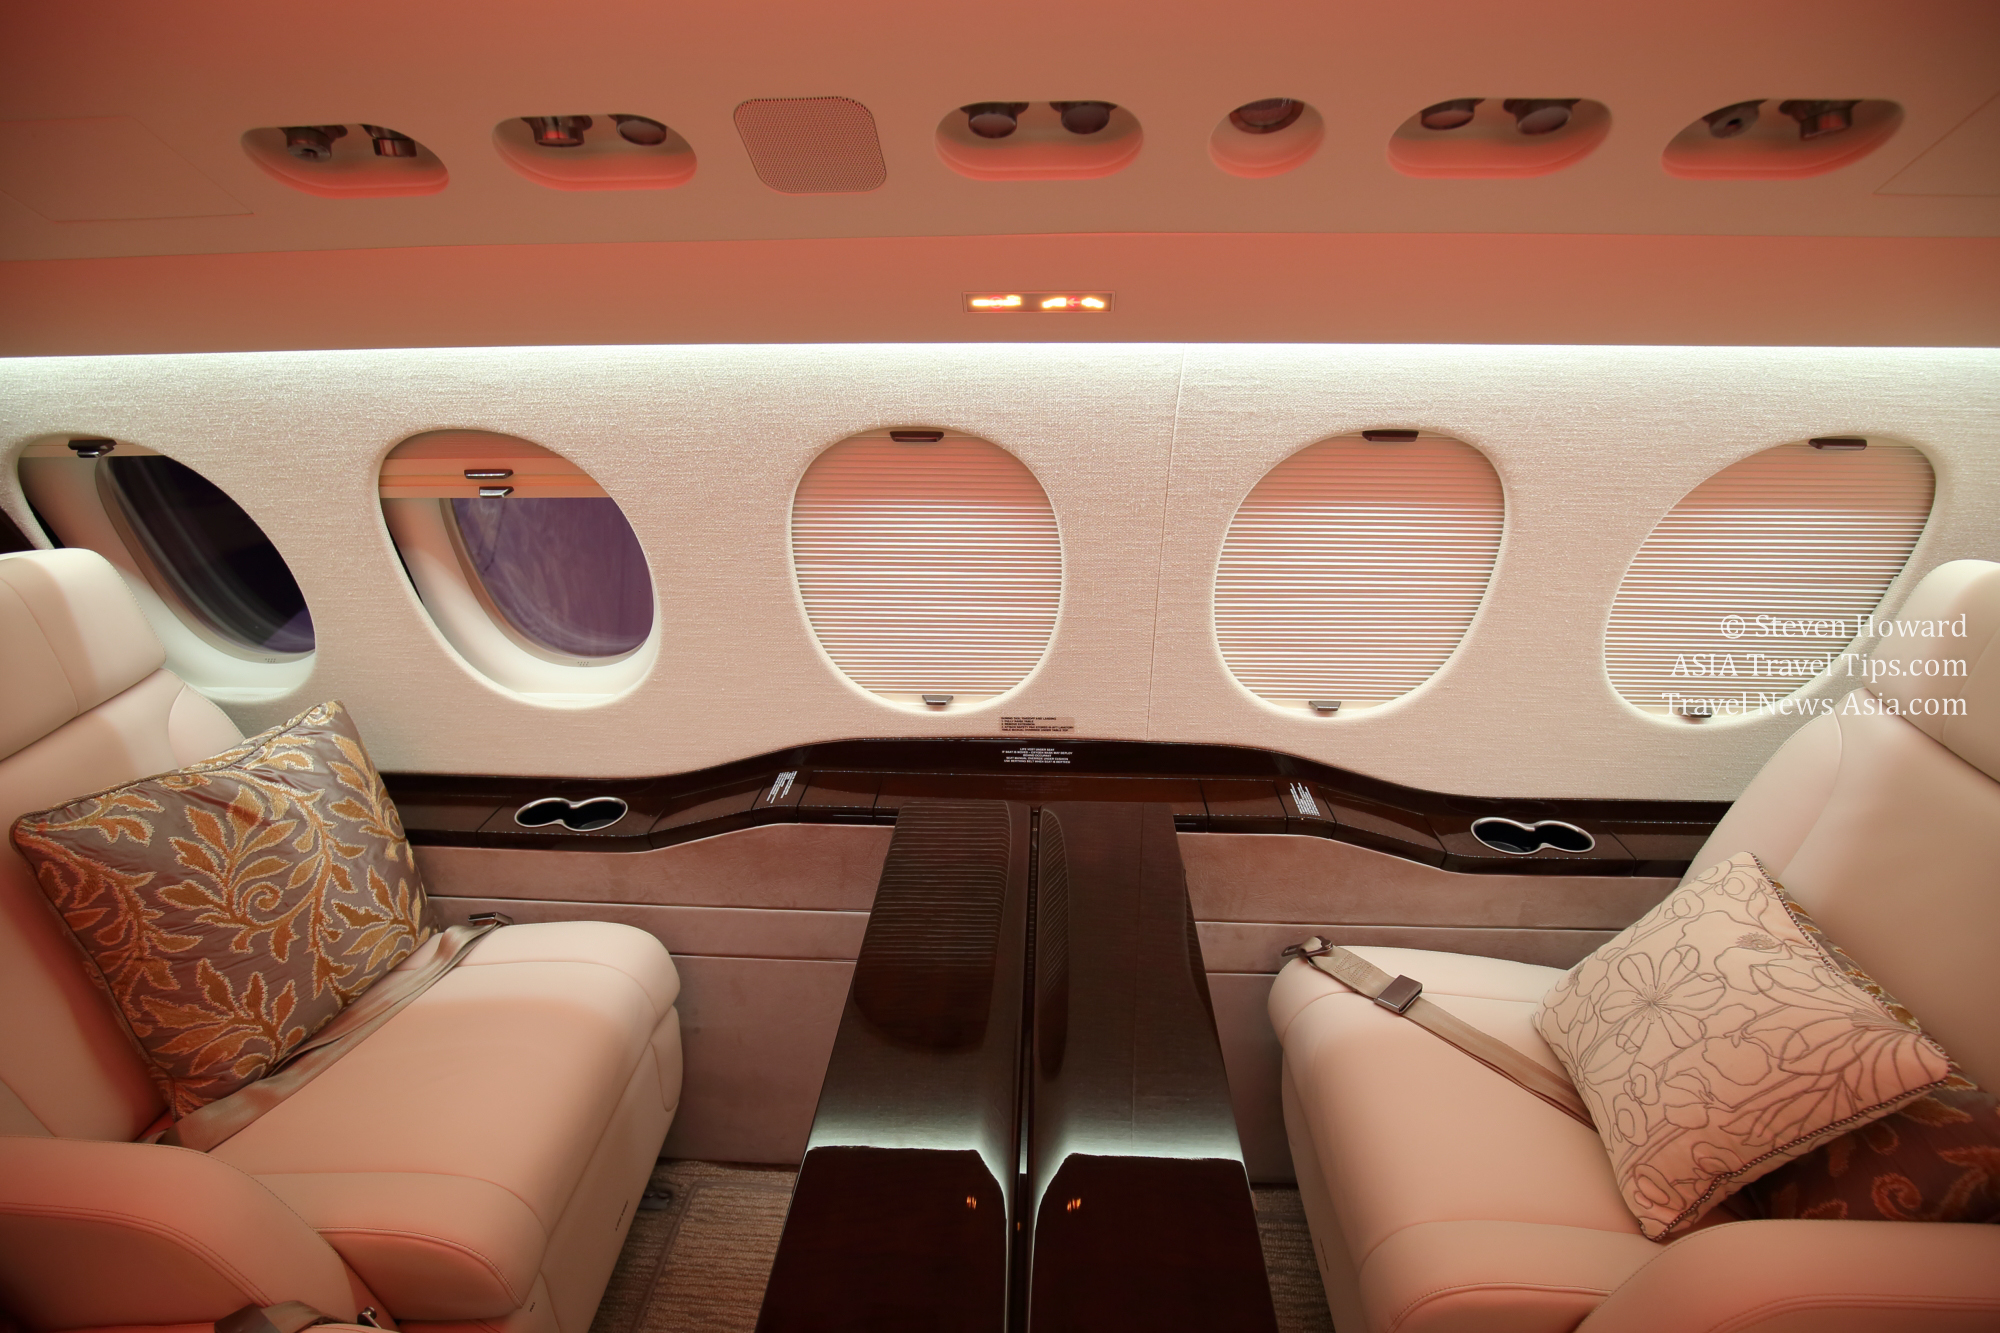 Luxury seating onboard a Dassault Falcon 8X. Picture by Steven Howard of TravelNewsAsia.com Click to enlarge.